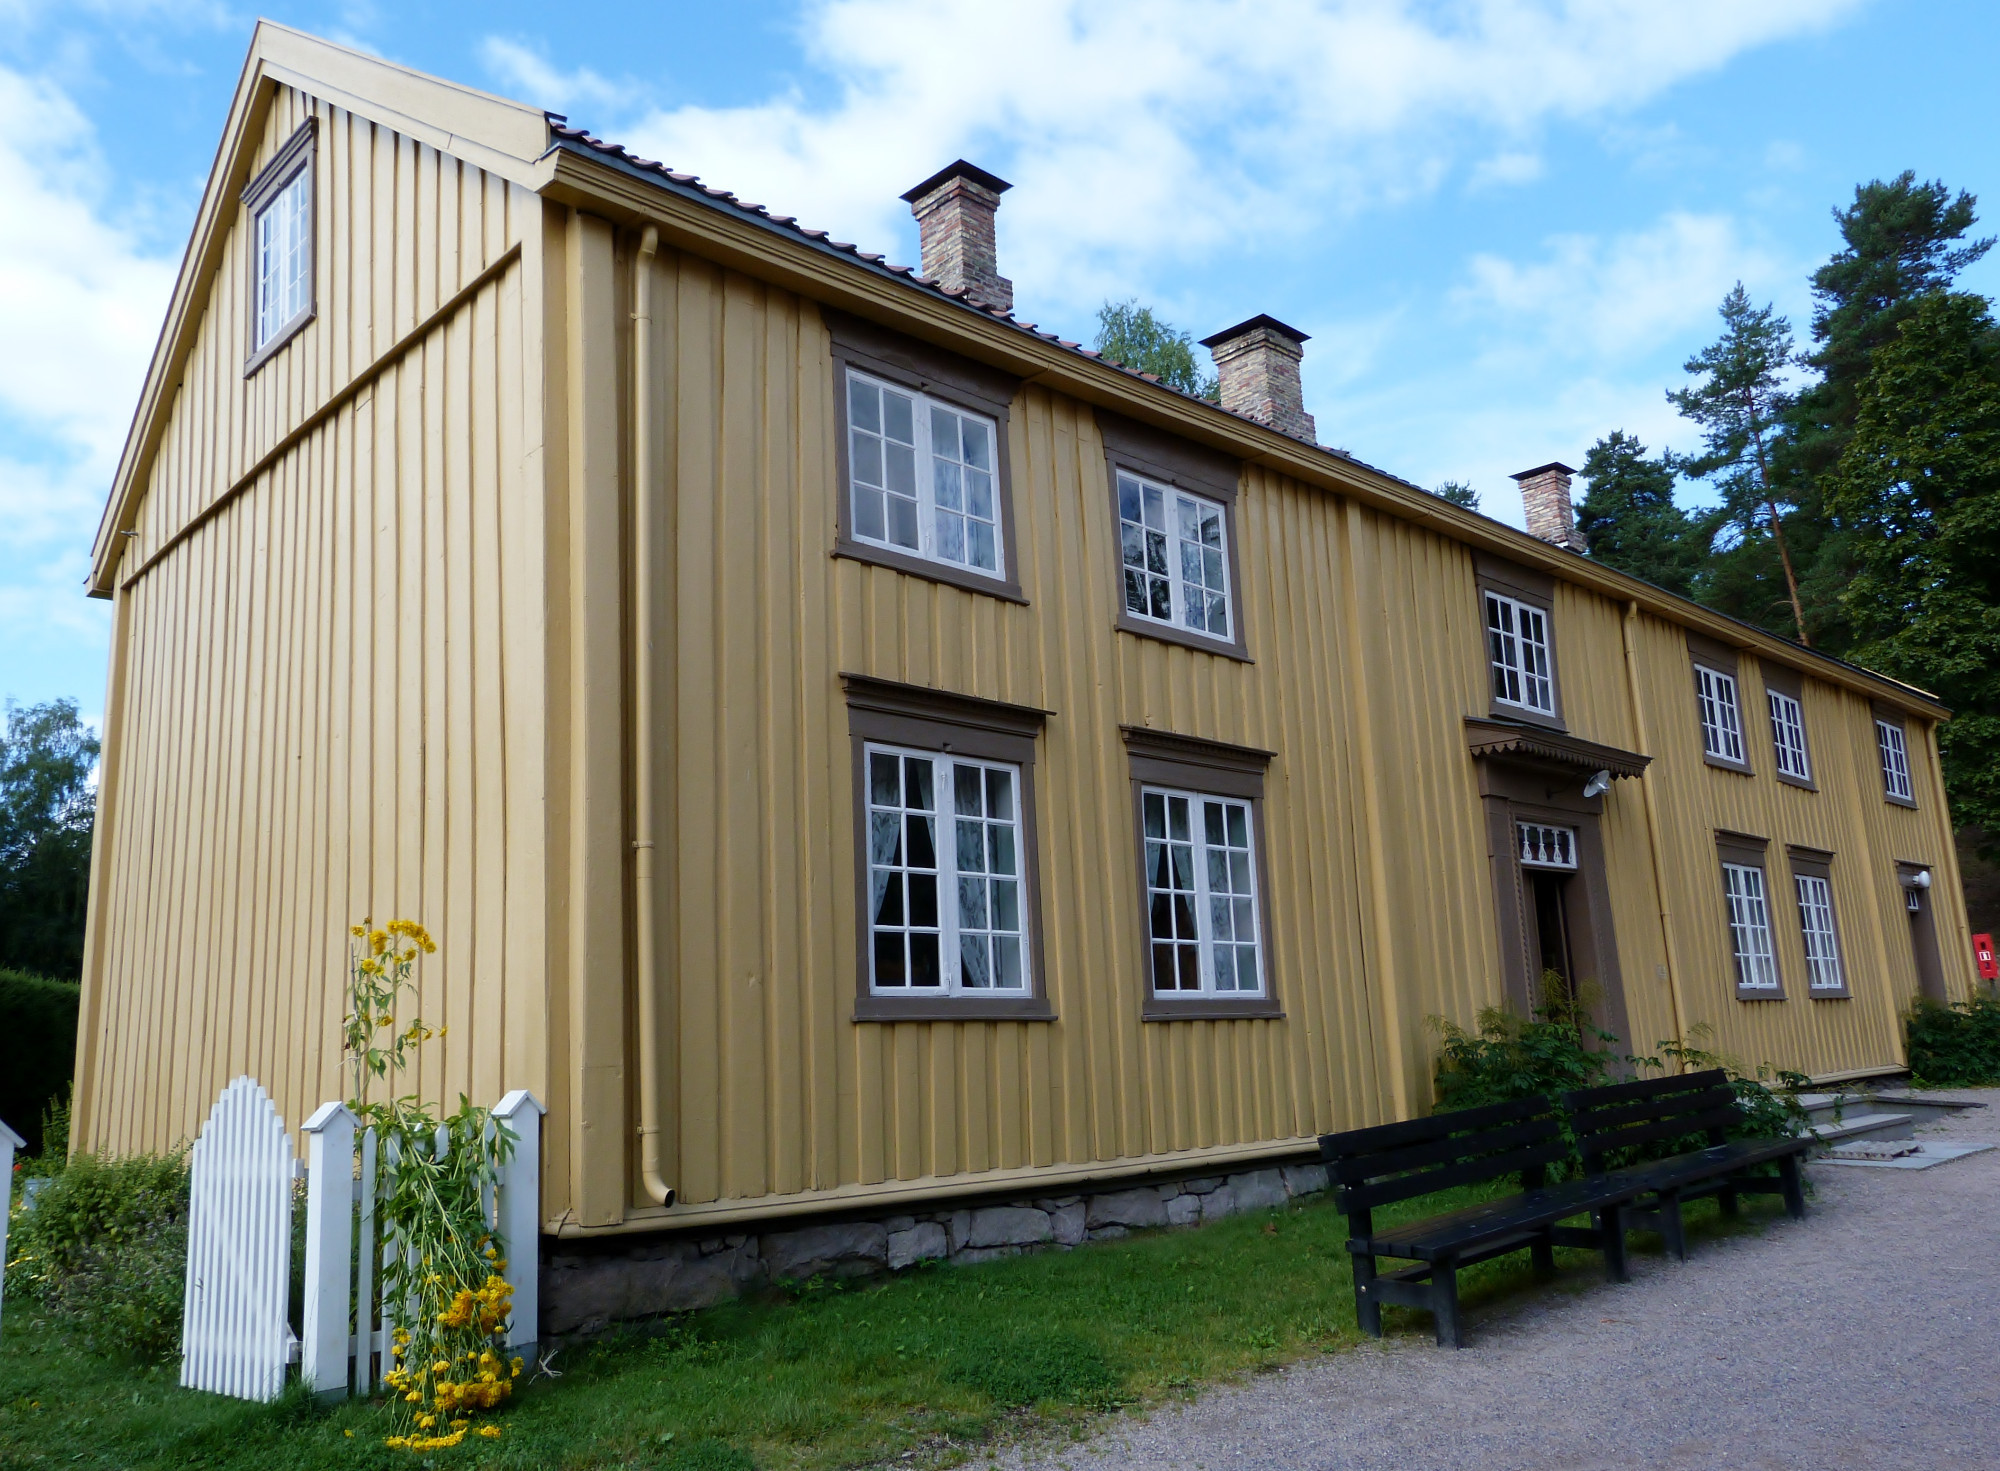 Norsk Fjellmuseum, Norway